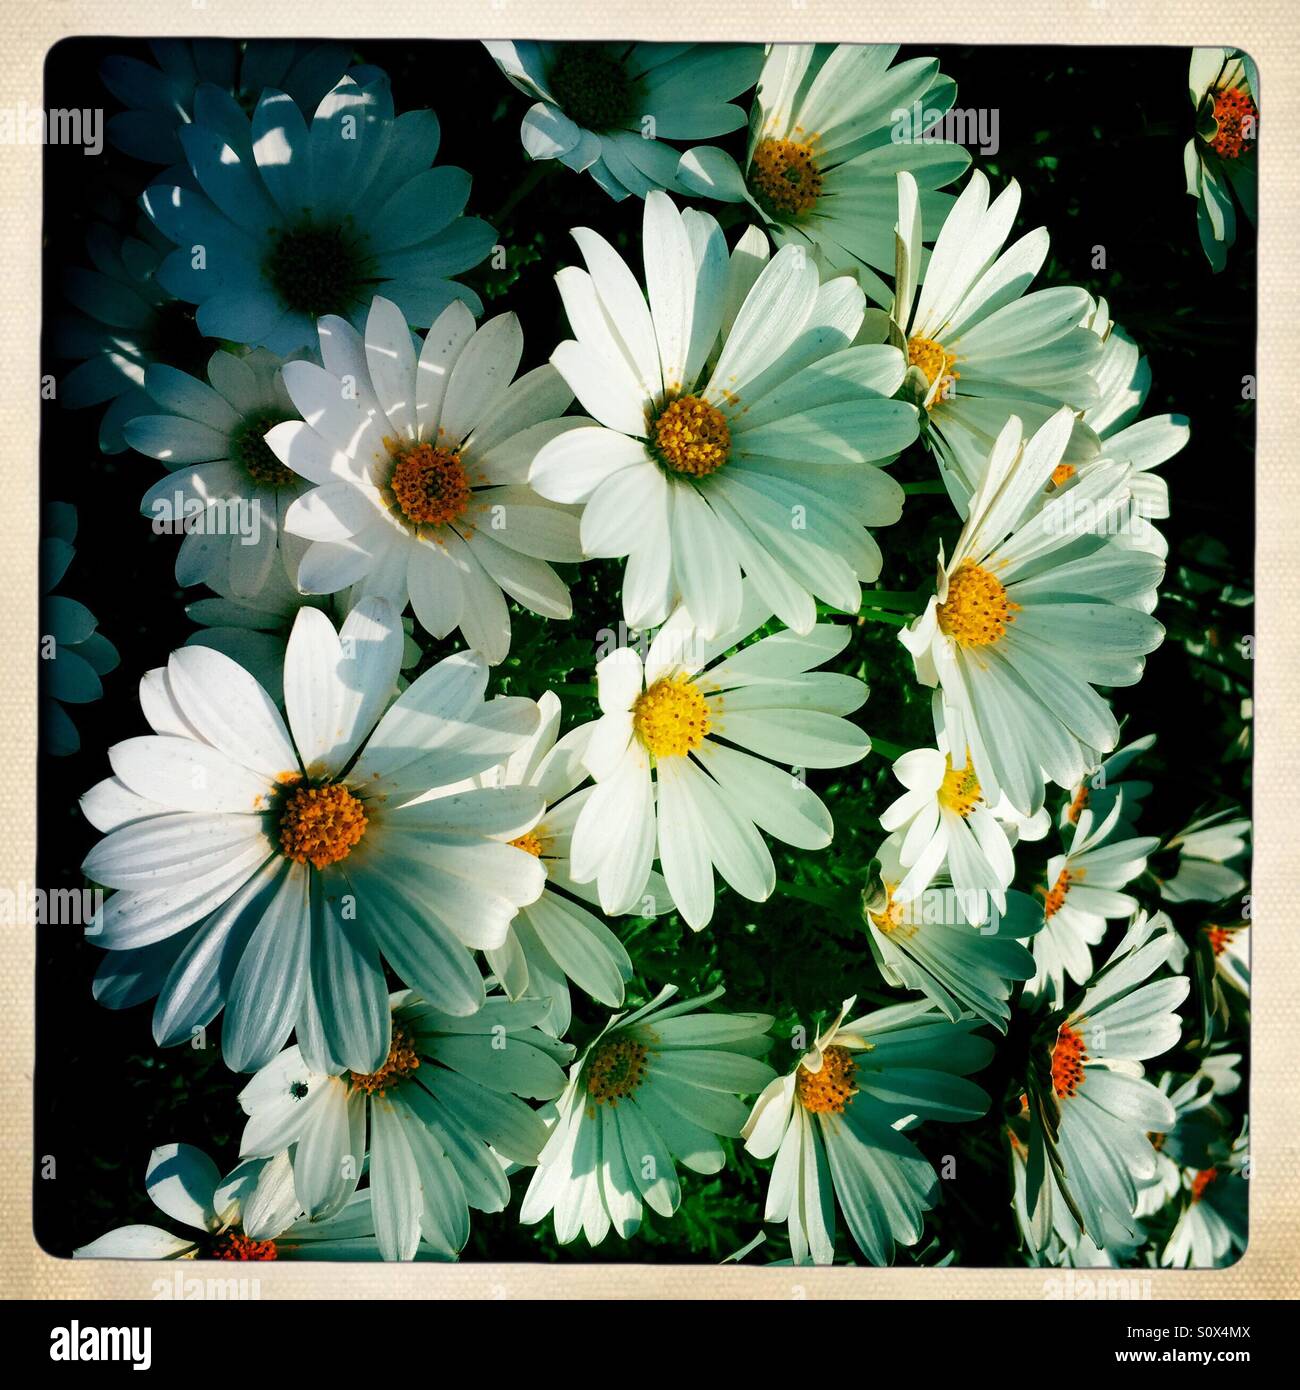 White daisy flowers with retro filter Stock Photo